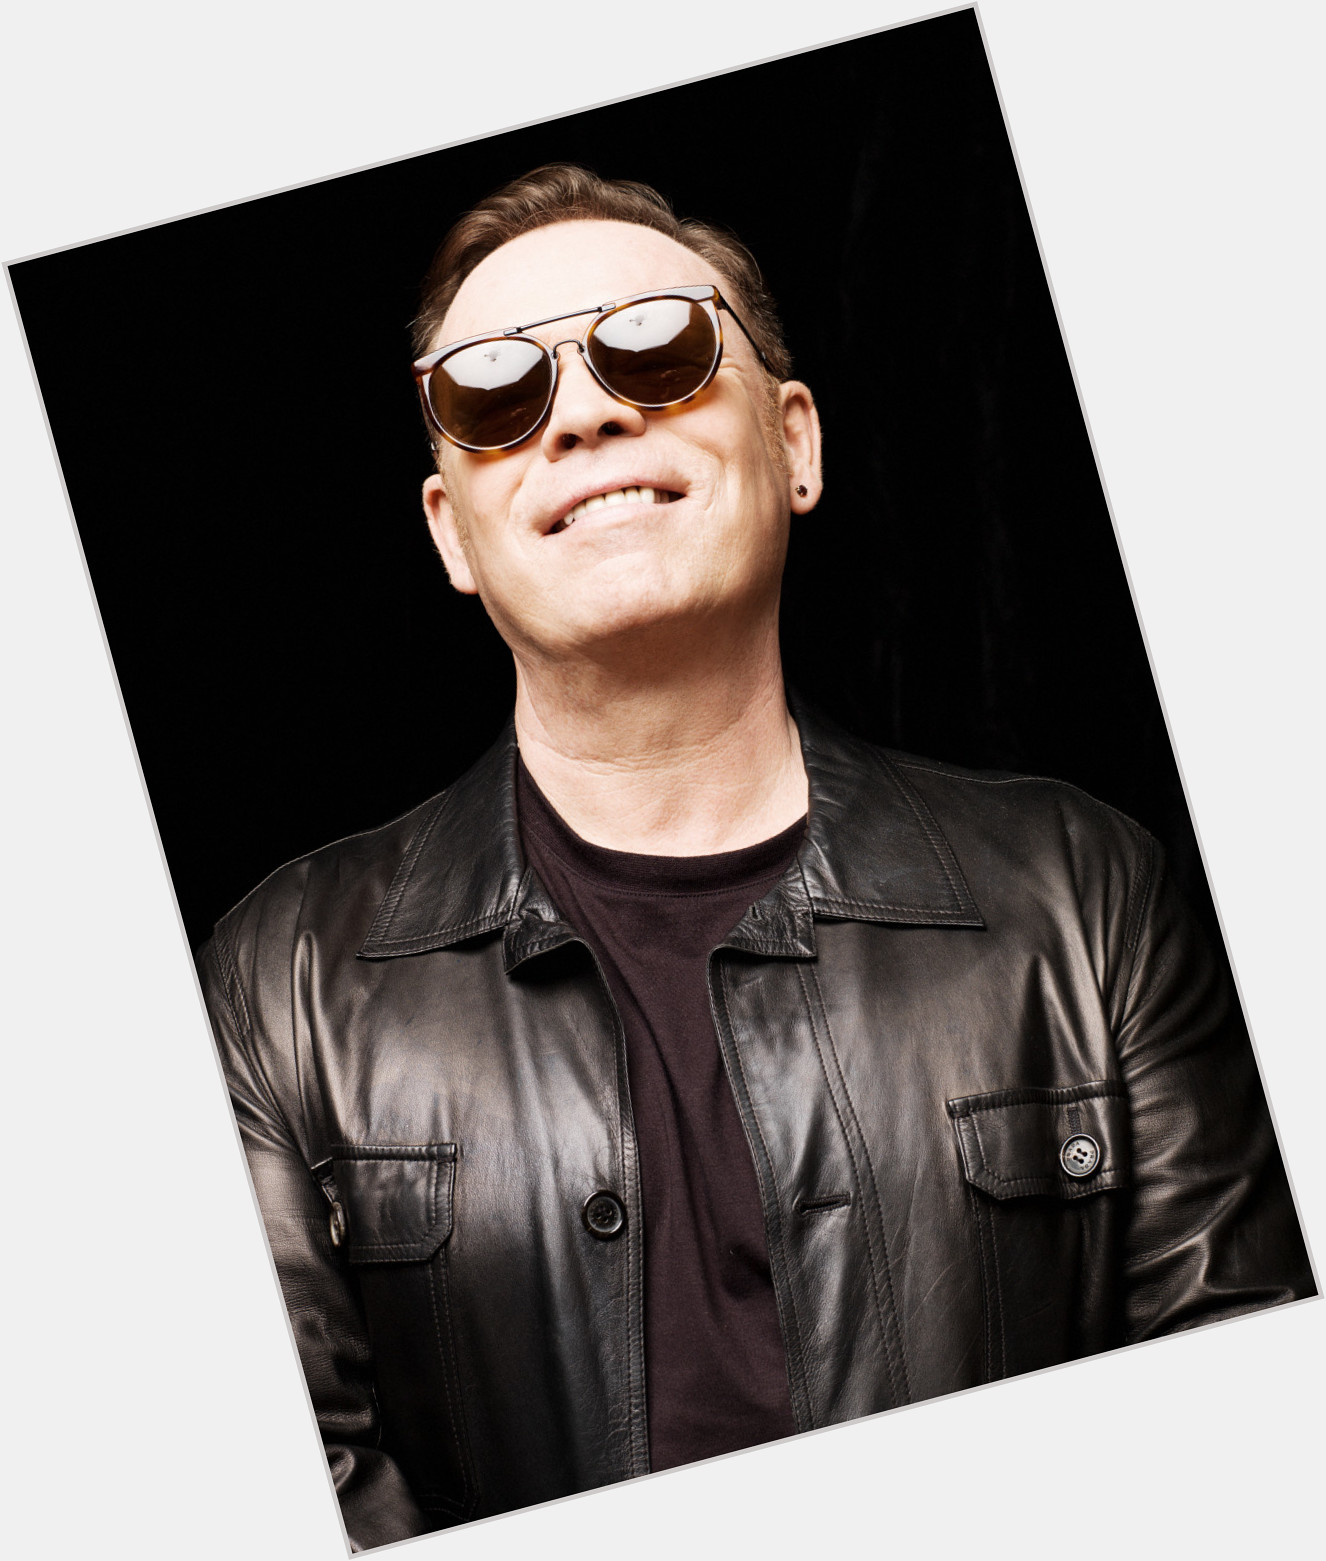 <a href="/hot-men/ali-campbell/where-dating-news-photos">Ali Campbell</a>  